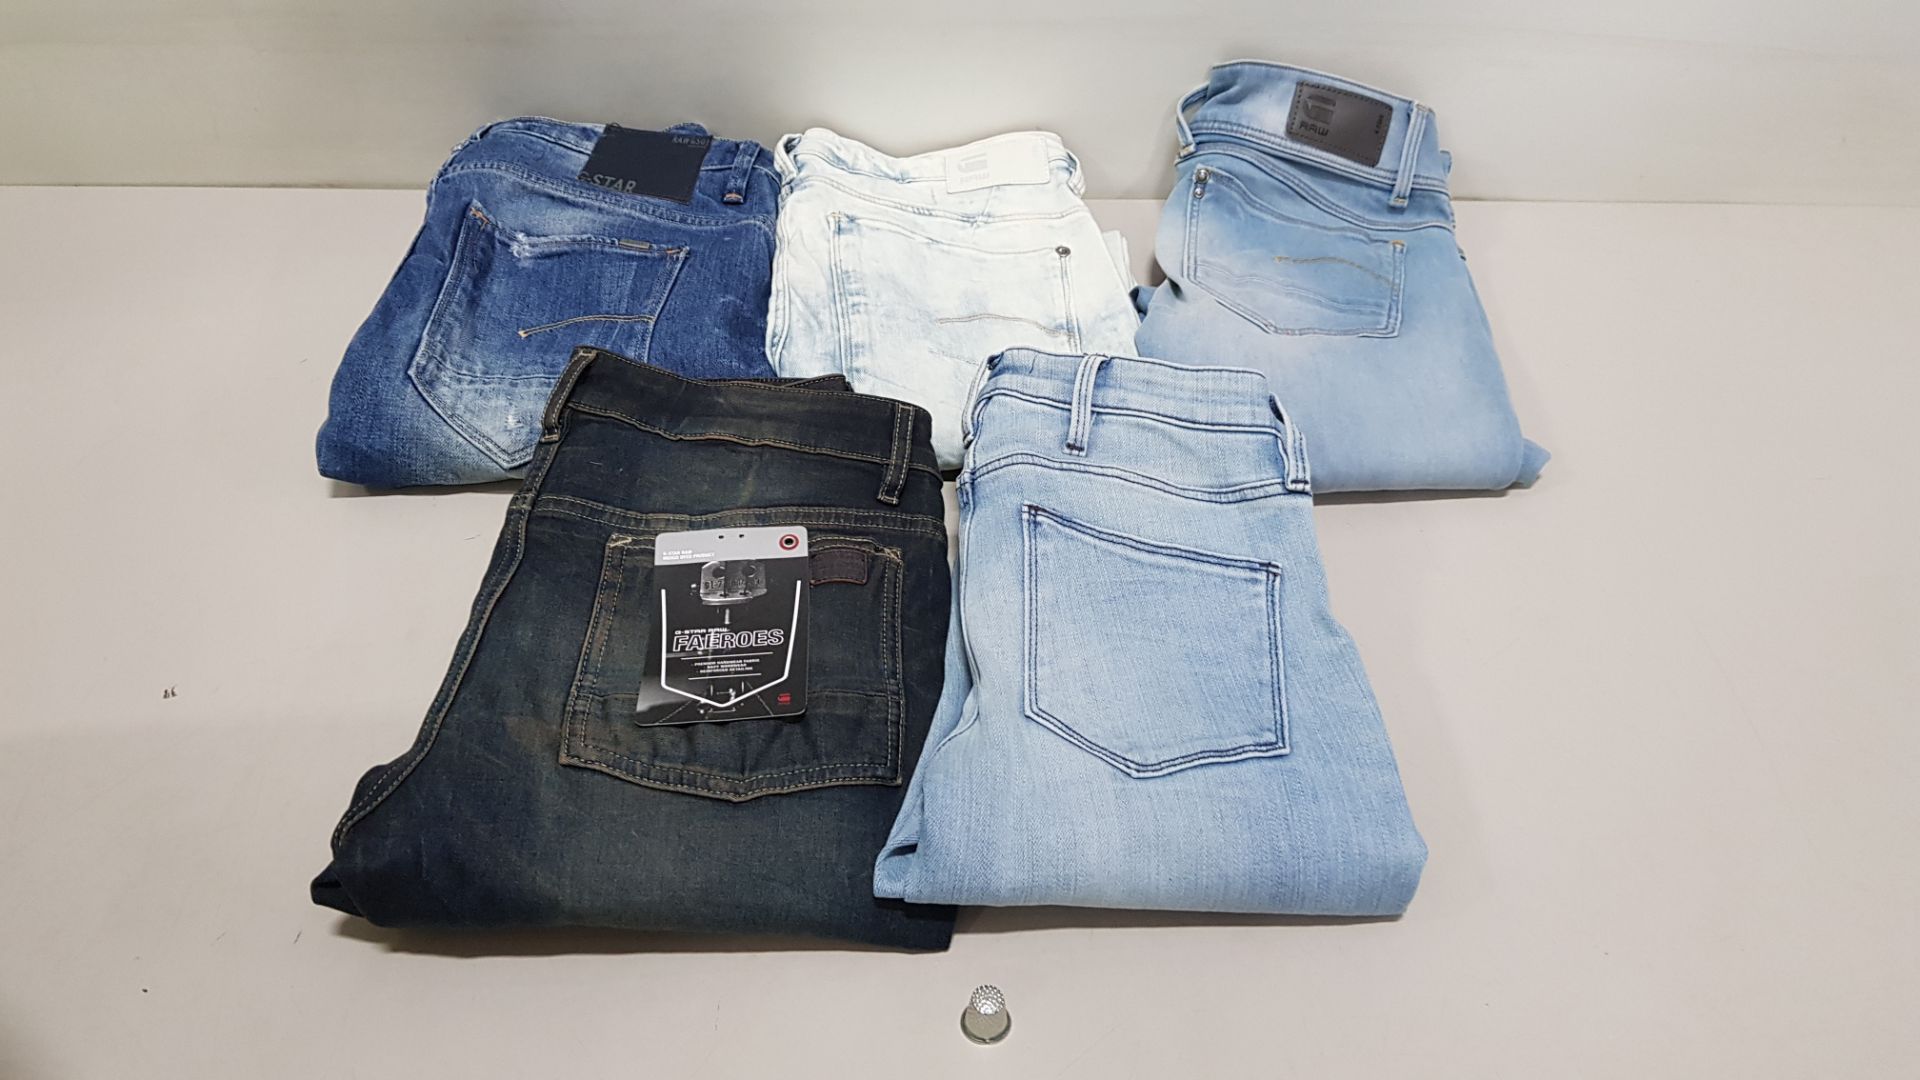 5 X PAIRS OF BRAND NEW G-STAR RAW JEANS IN VARIOUS STYLES & COLOURS IE. LIGHT BLUE, & DARK BLUE -